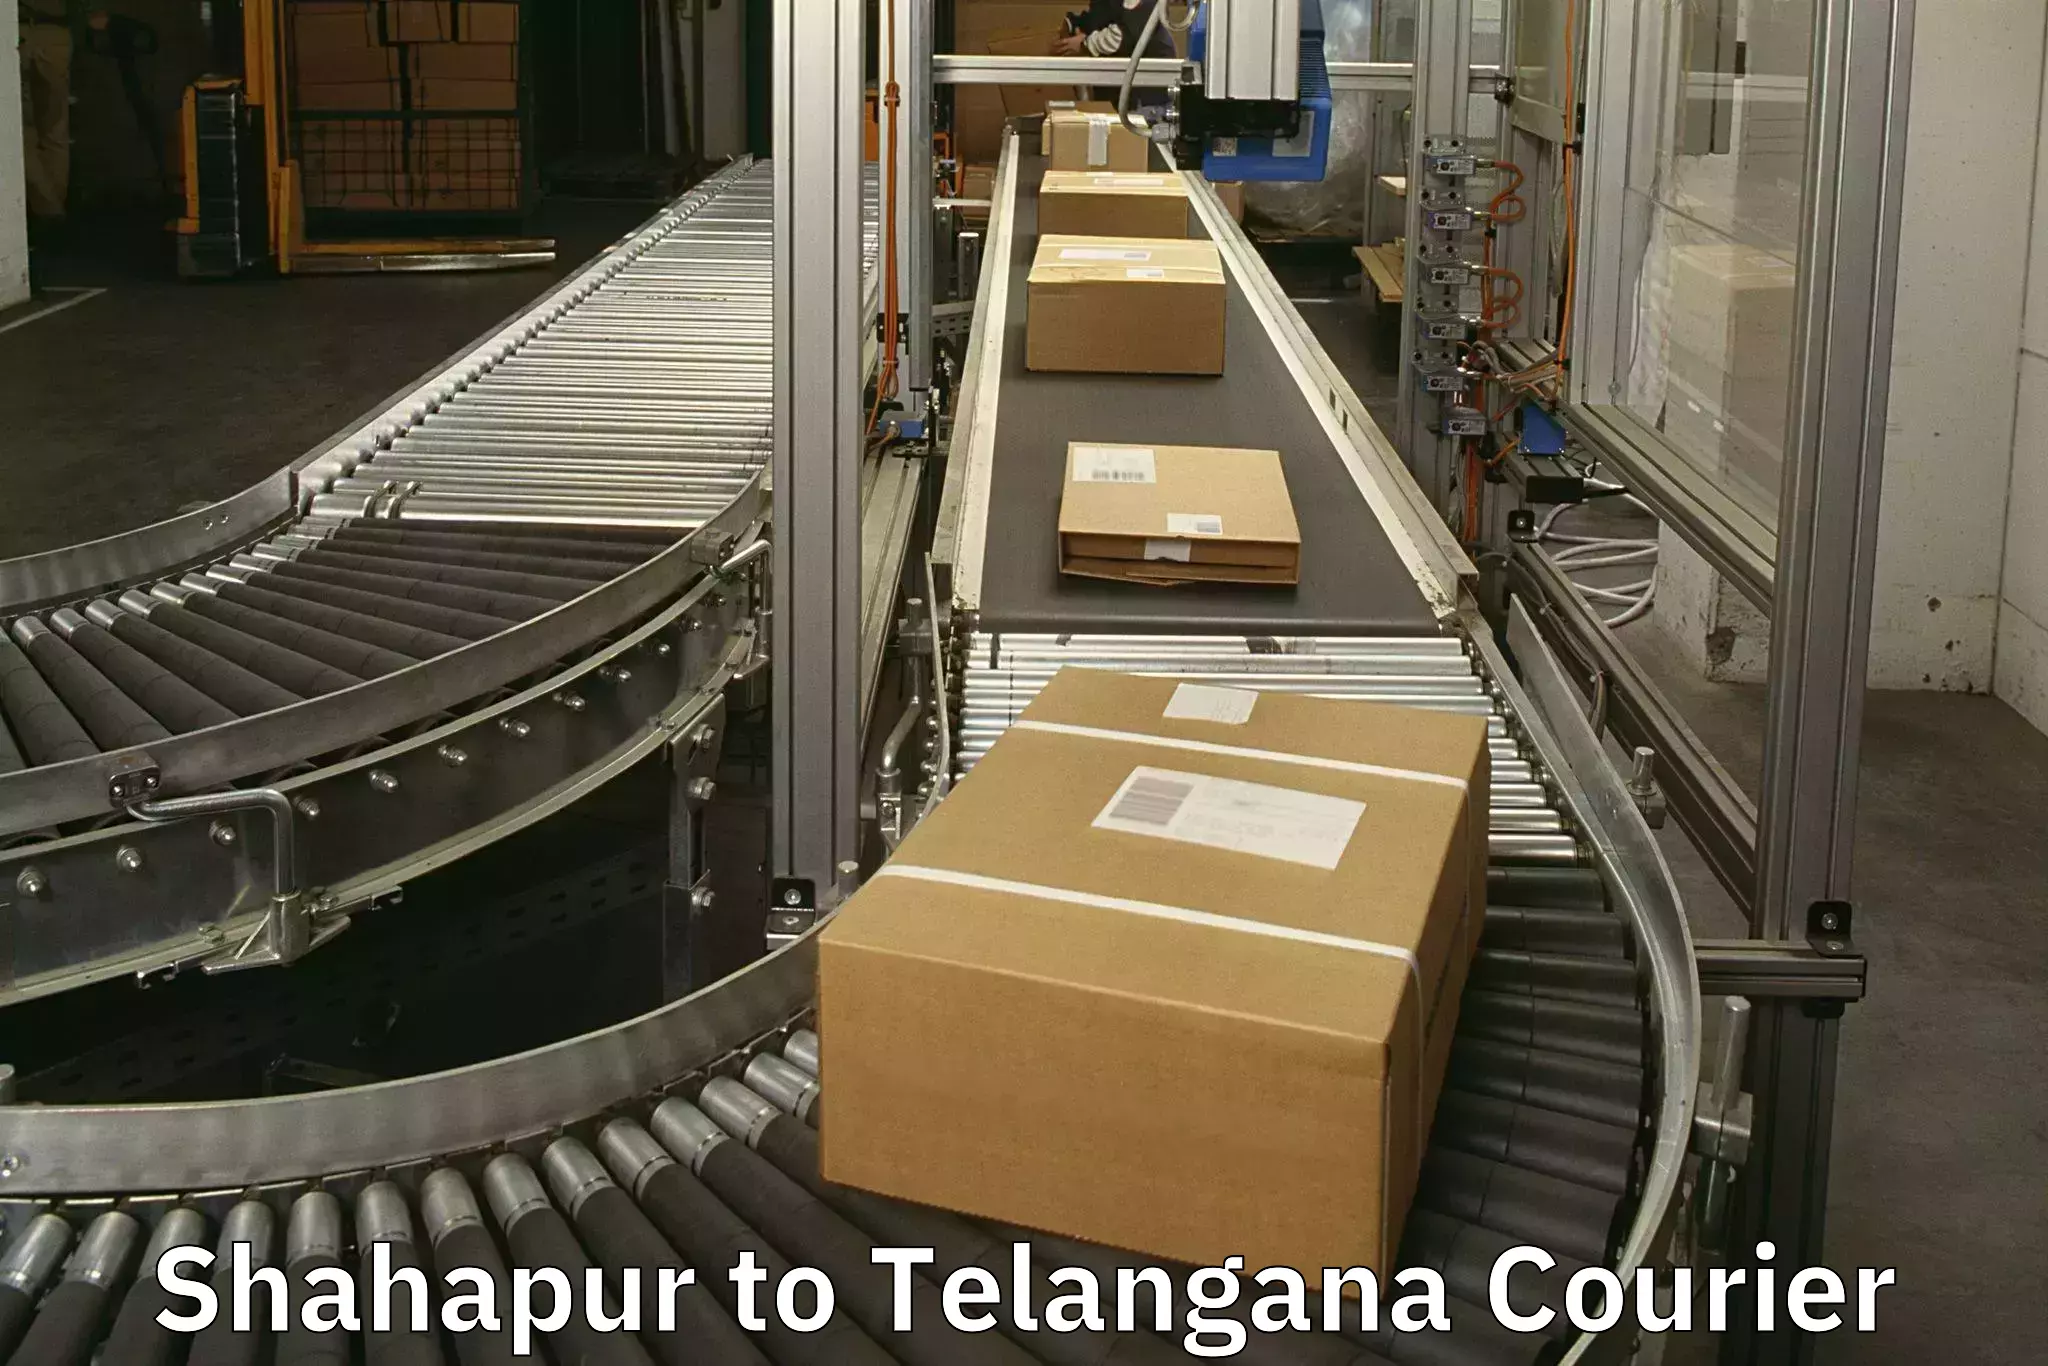 Baggage transport professionals Shahapur to Sultanabad